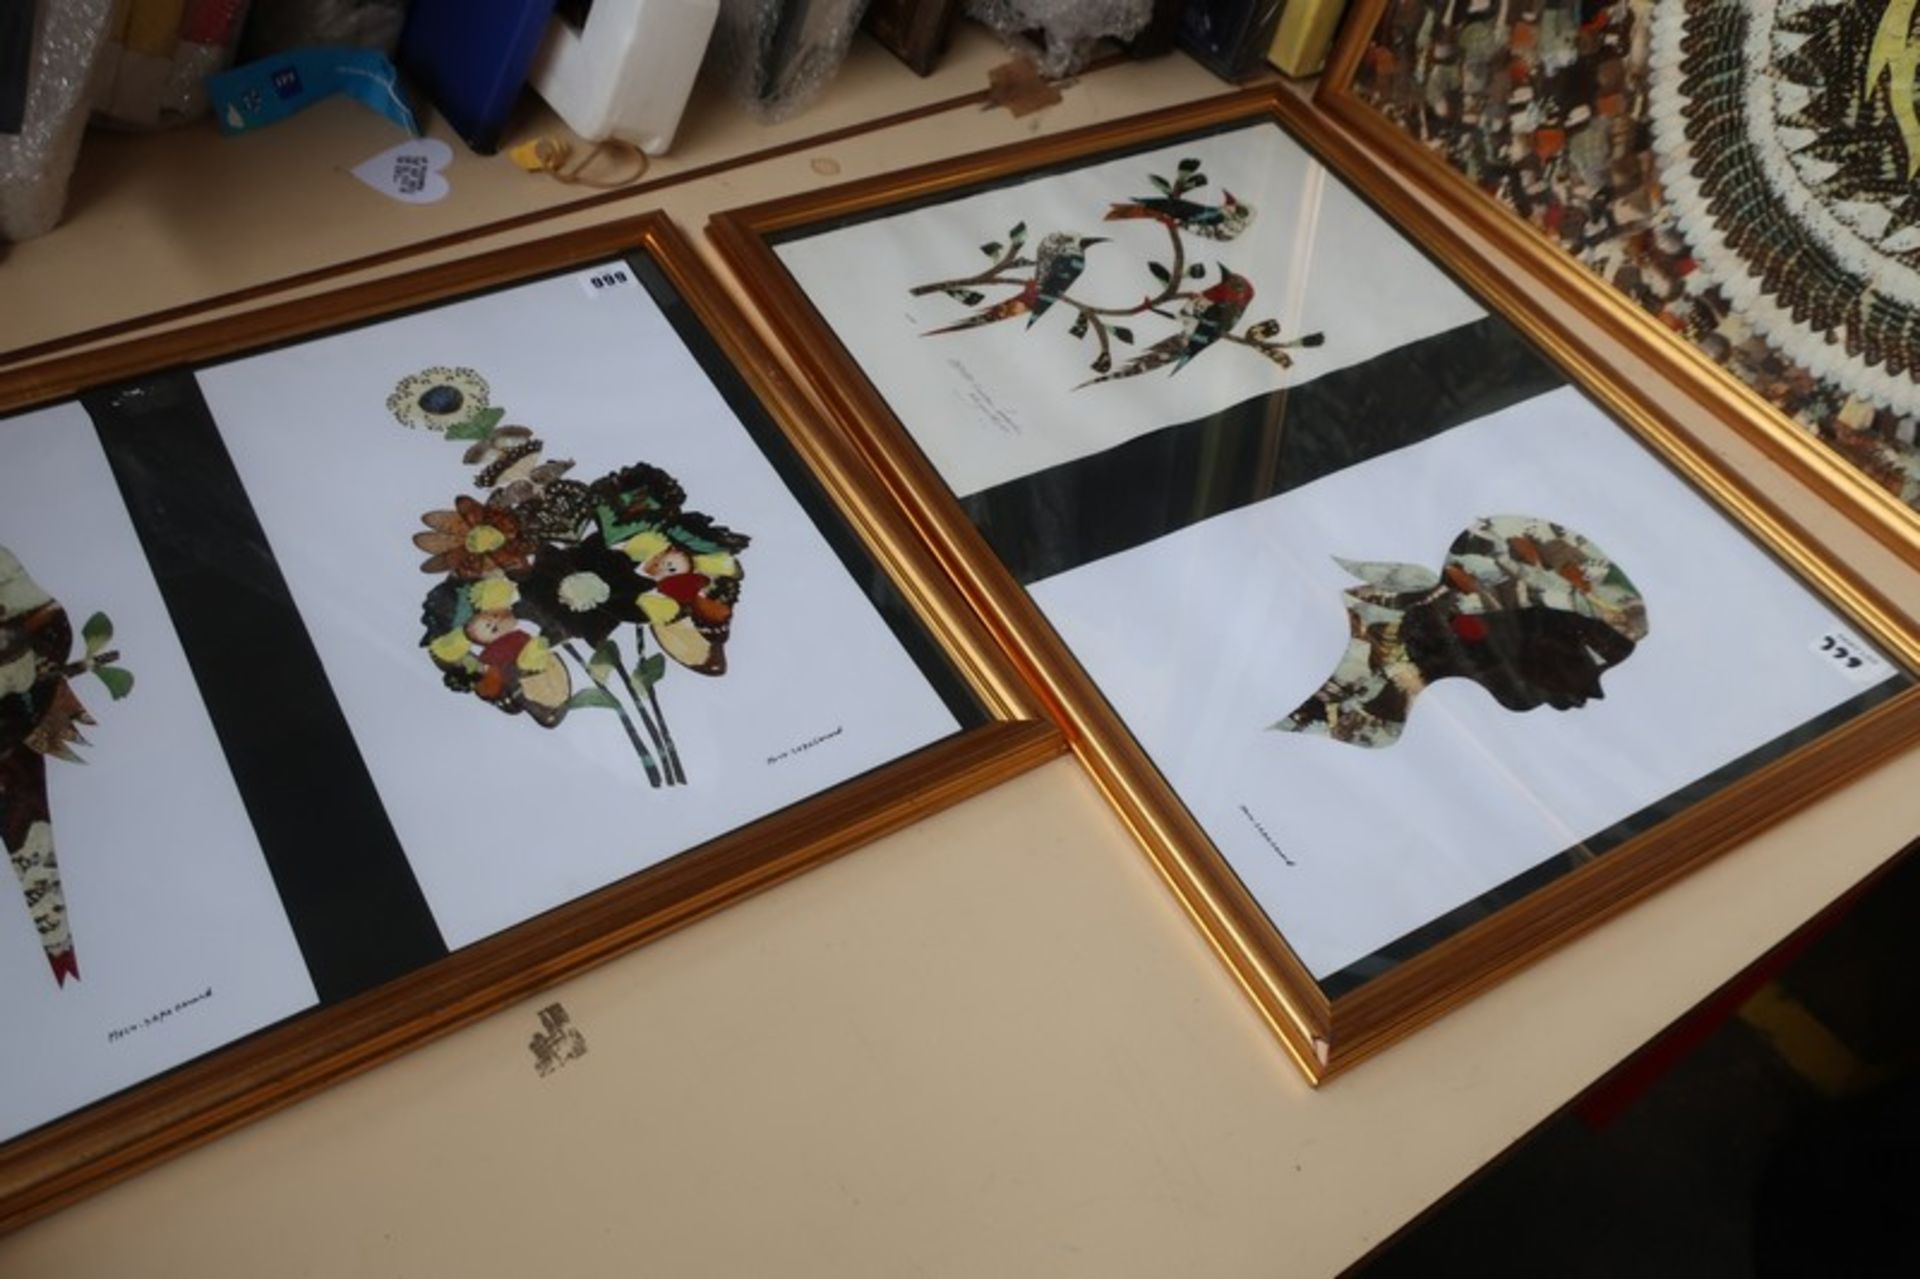 Three framed butterfly wing pictures; one of a lion, the remaining two with flowers and a side